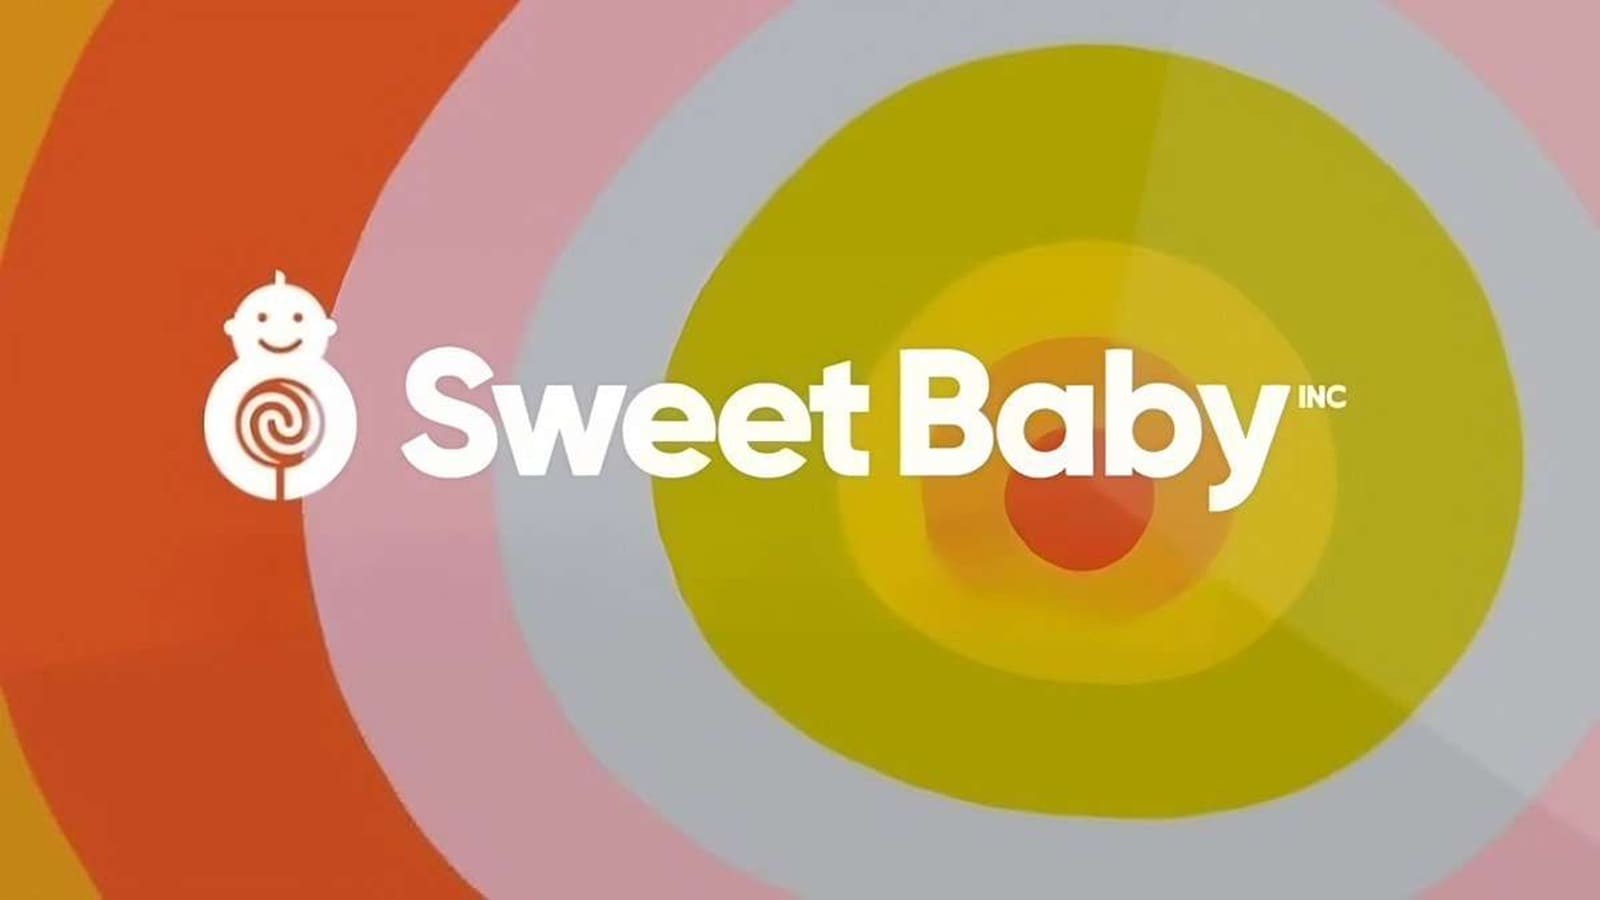 Sweet Baby Inc. is once again under the spotlight